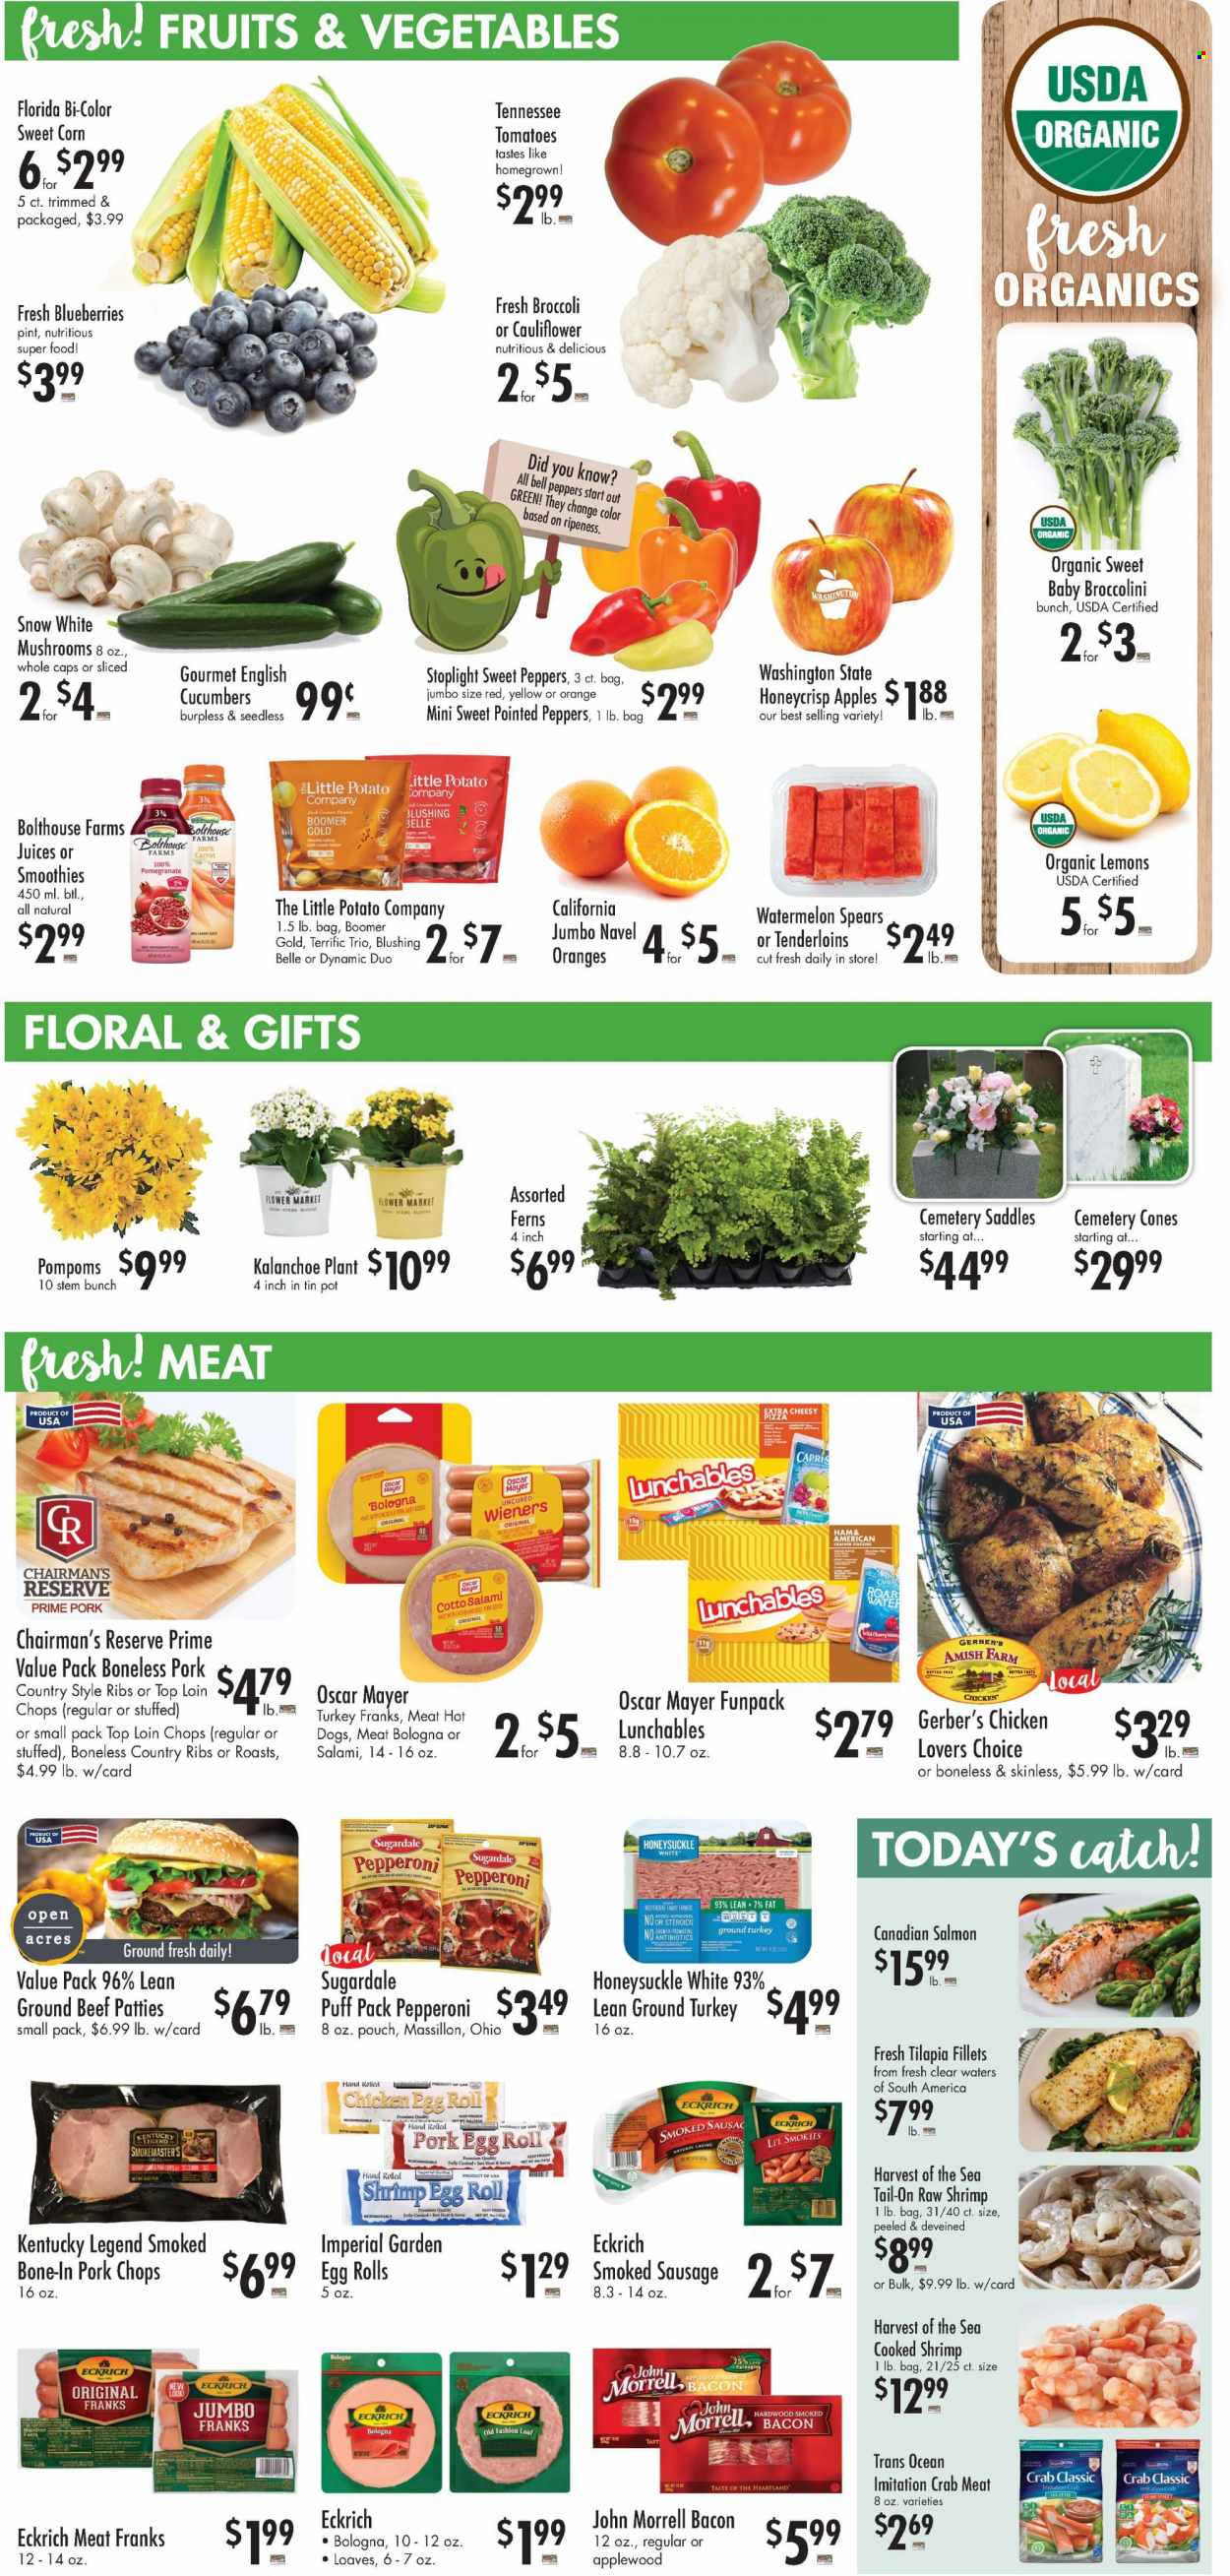 thumbnail - Buehler's Flyer - 05/18/2022 - 05/24/2022 - Sales products - bell peppers, broccoli, corn, cucumber, sweet peppers, sweet corn, broccolini, apples, blueberries, watermelon, cherries, oranges, crab meat, salmon, tilapia, crab, shrimps, hot dog, pizza, egg rolls, Lunchables, Sugardale, bacon, salami, ham, Oscar Mayer, sausage, smoked sausage, pepperoni, eggs, Heartland, juice, ground turkey, beef meat, ground beef, pork chops, pork meat, pork ribs, country style ribs, pot, Pom Poms, pomegranate, lemons. Page 6.